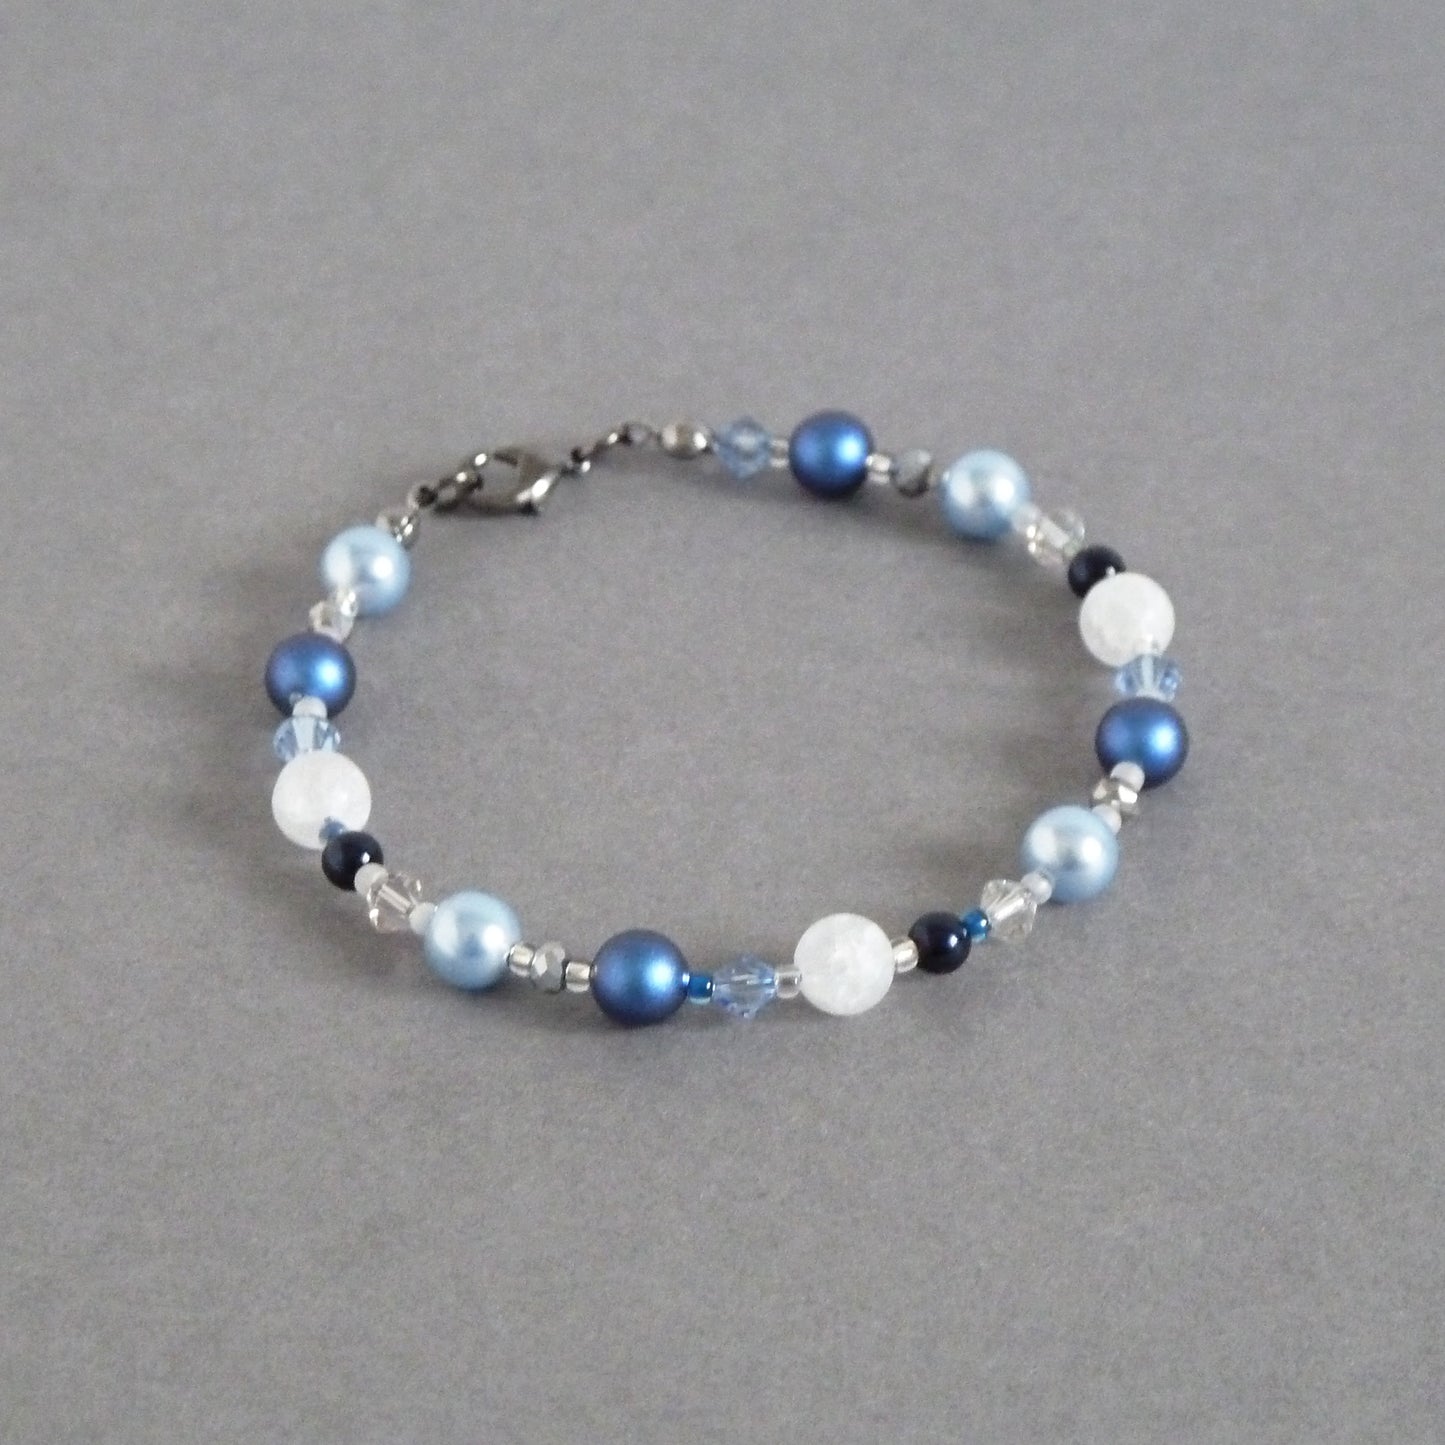 Mid blue pearl bracelet made with a mix of light blue, royal blue, navy and frosty white tones.